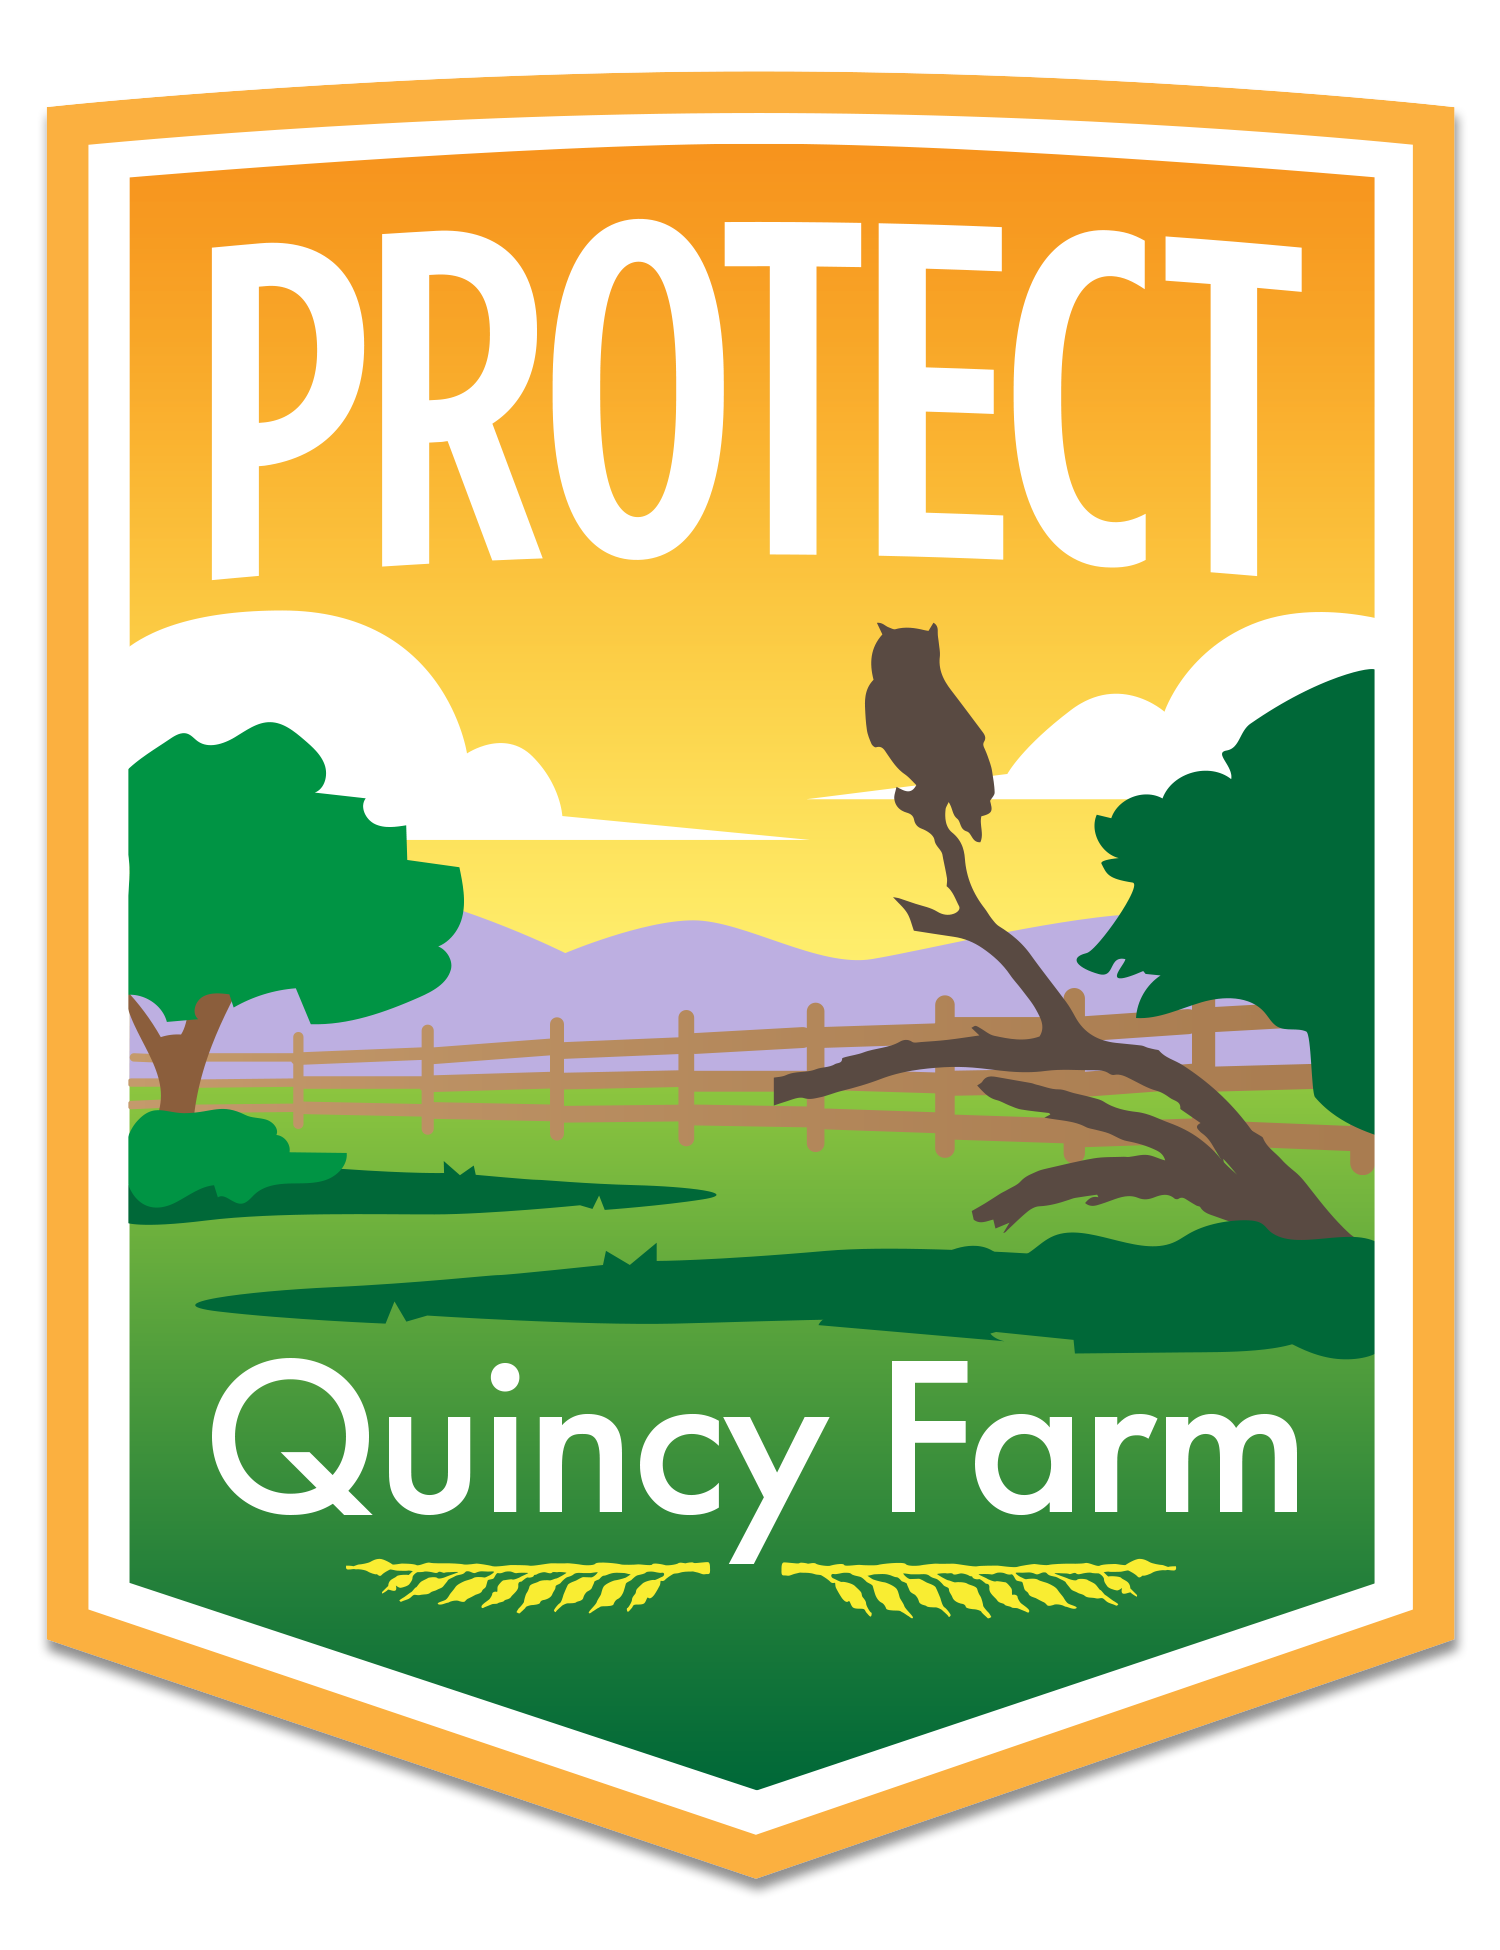 Protect and Preserve Quincy Farm